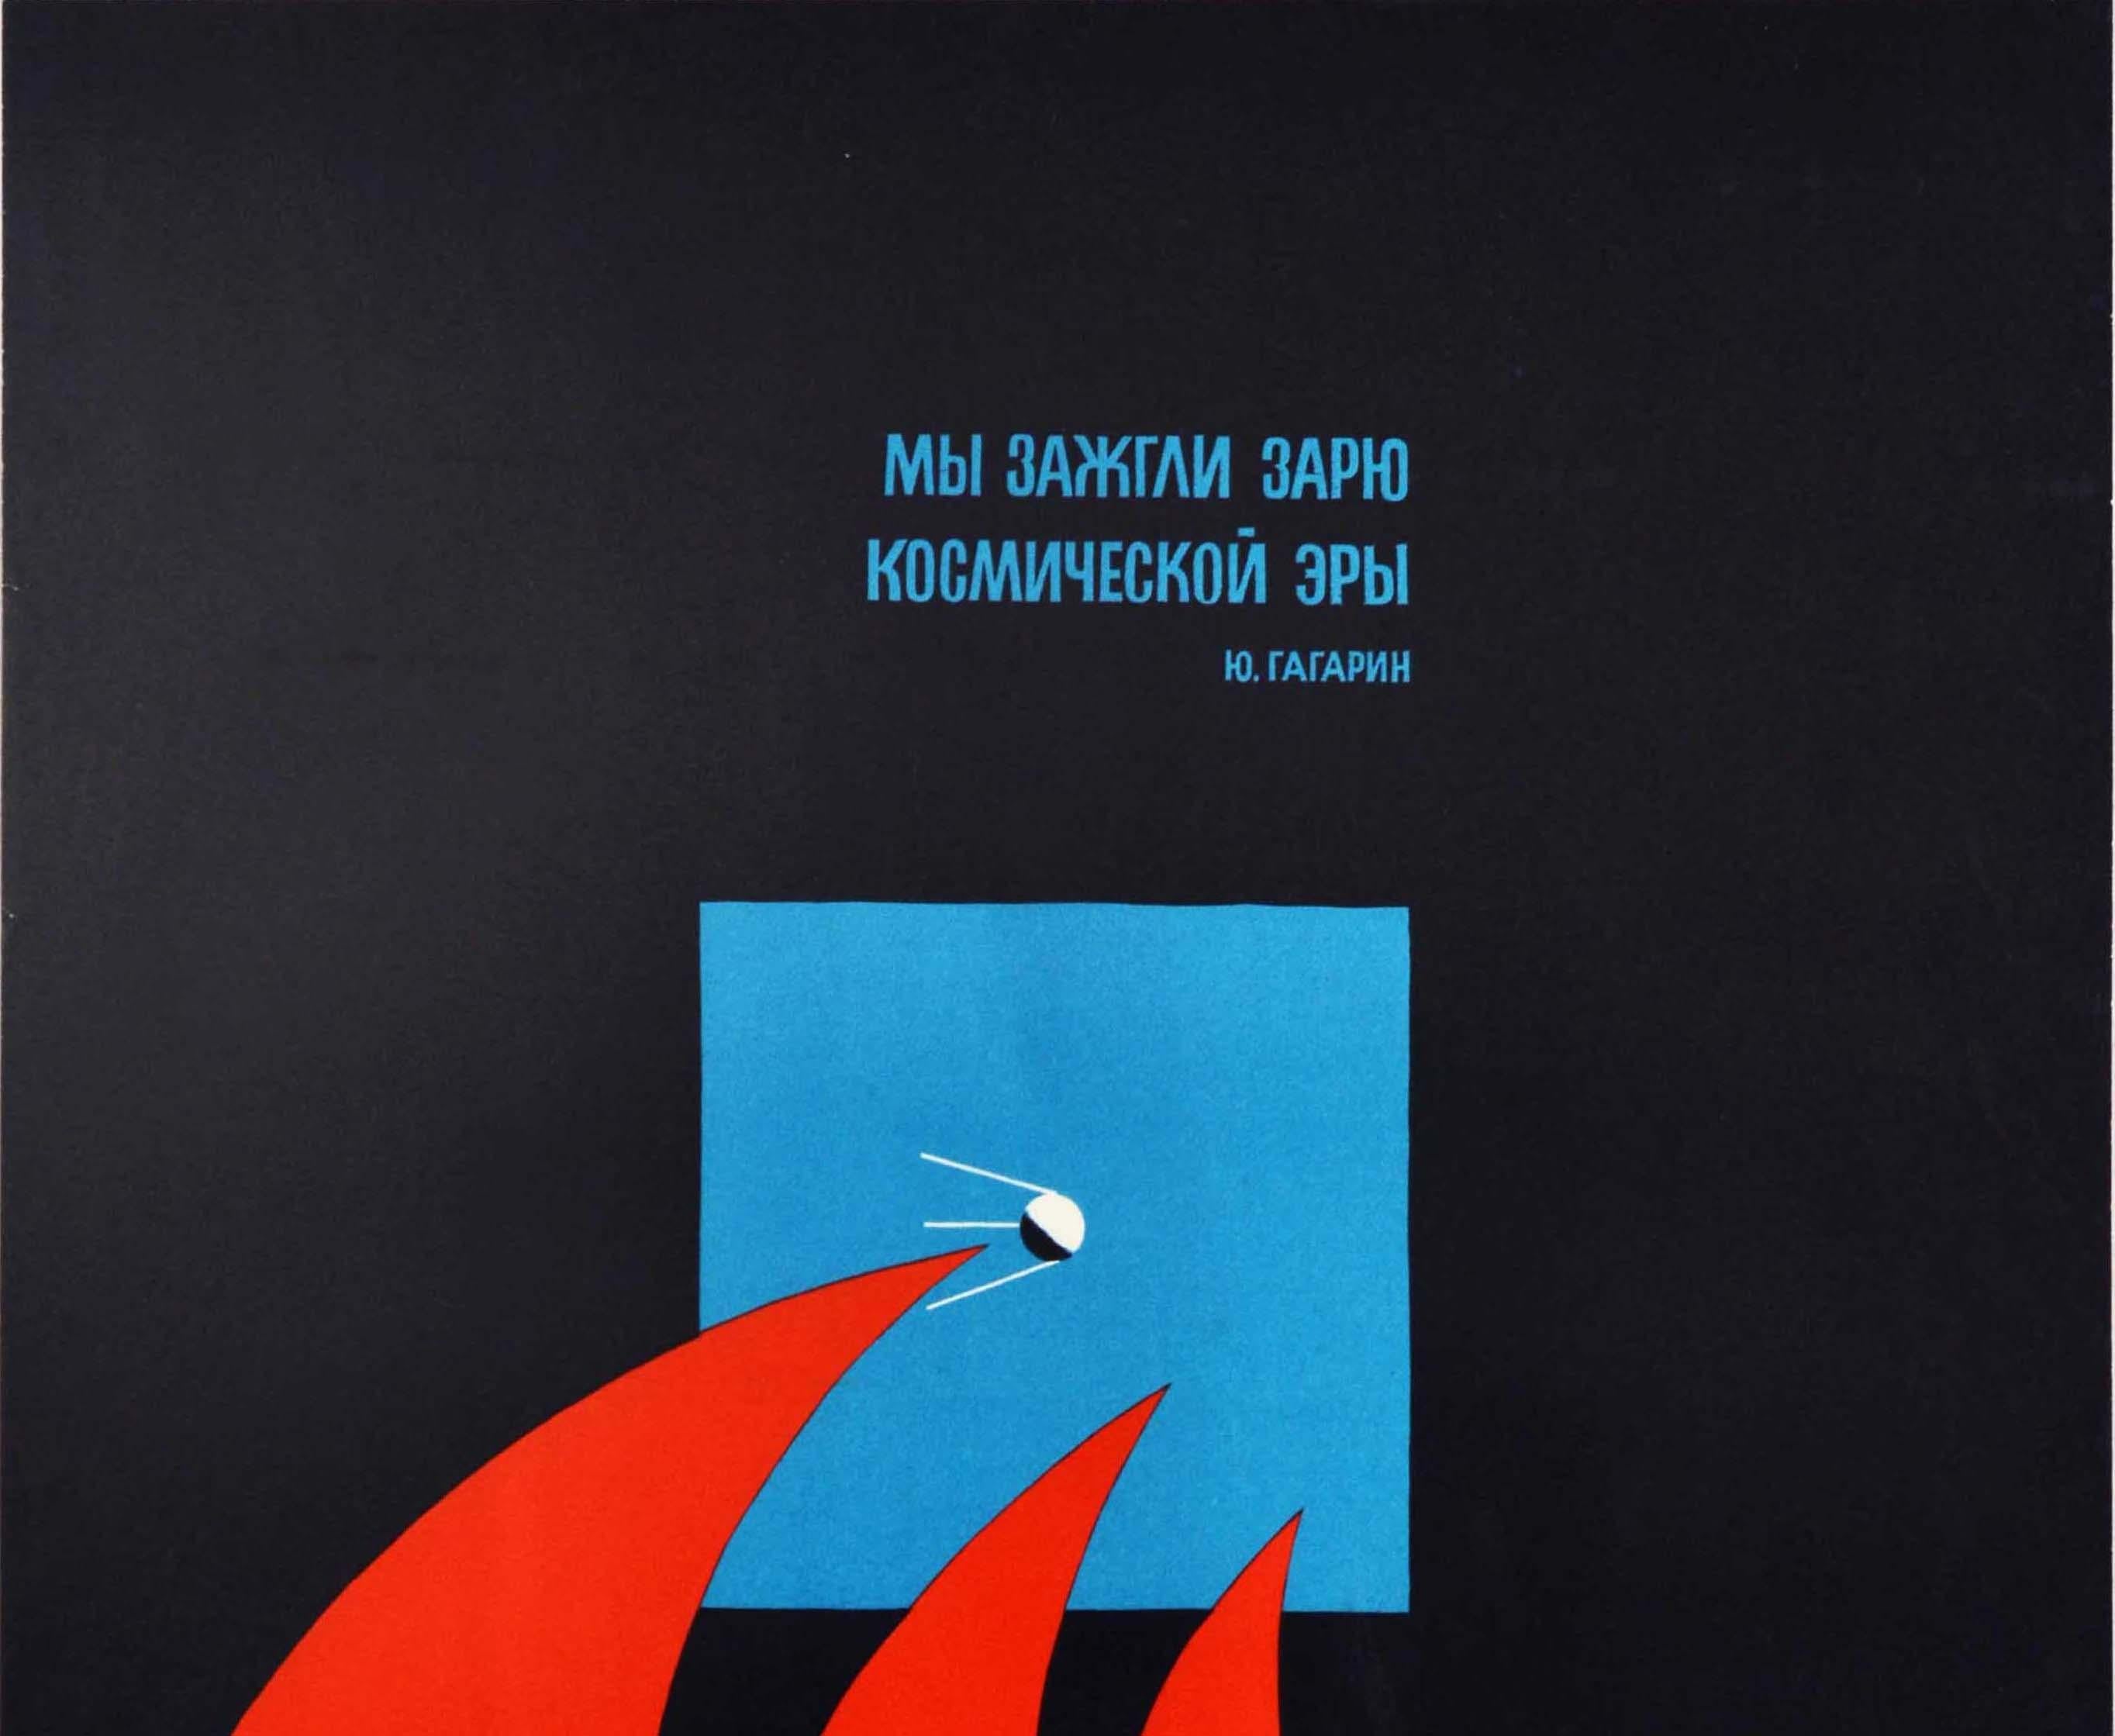 Original vintage Soviet poster featuring a quote by the first man in space Yuri Gagarin (Yuri Alekseyevich Gagarin; 1934-1968) - We lit up the dawn of the space age / ?? ?????? ???? ??????????? ??? - above a minimalist blue and red mid-century